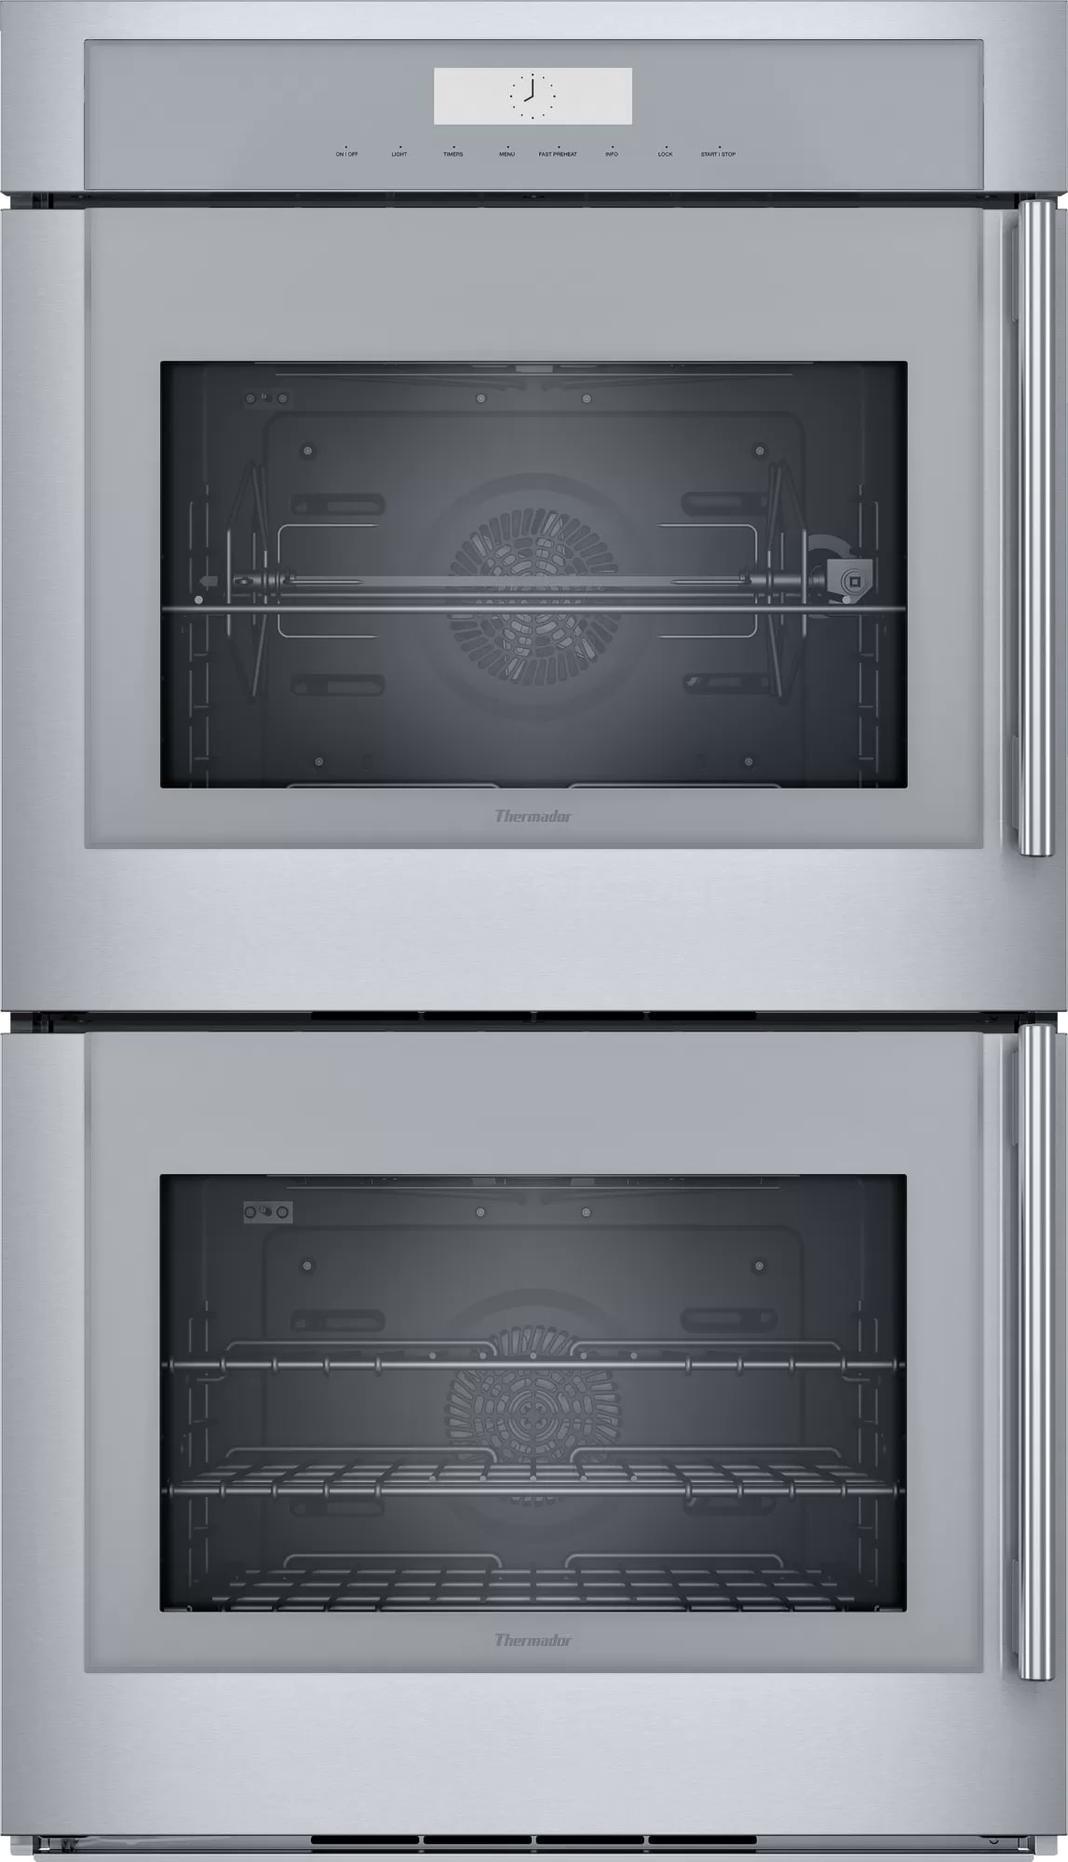 Thermador - 9 cu. ft Double Wall Oven in Stainless - MED302LWS